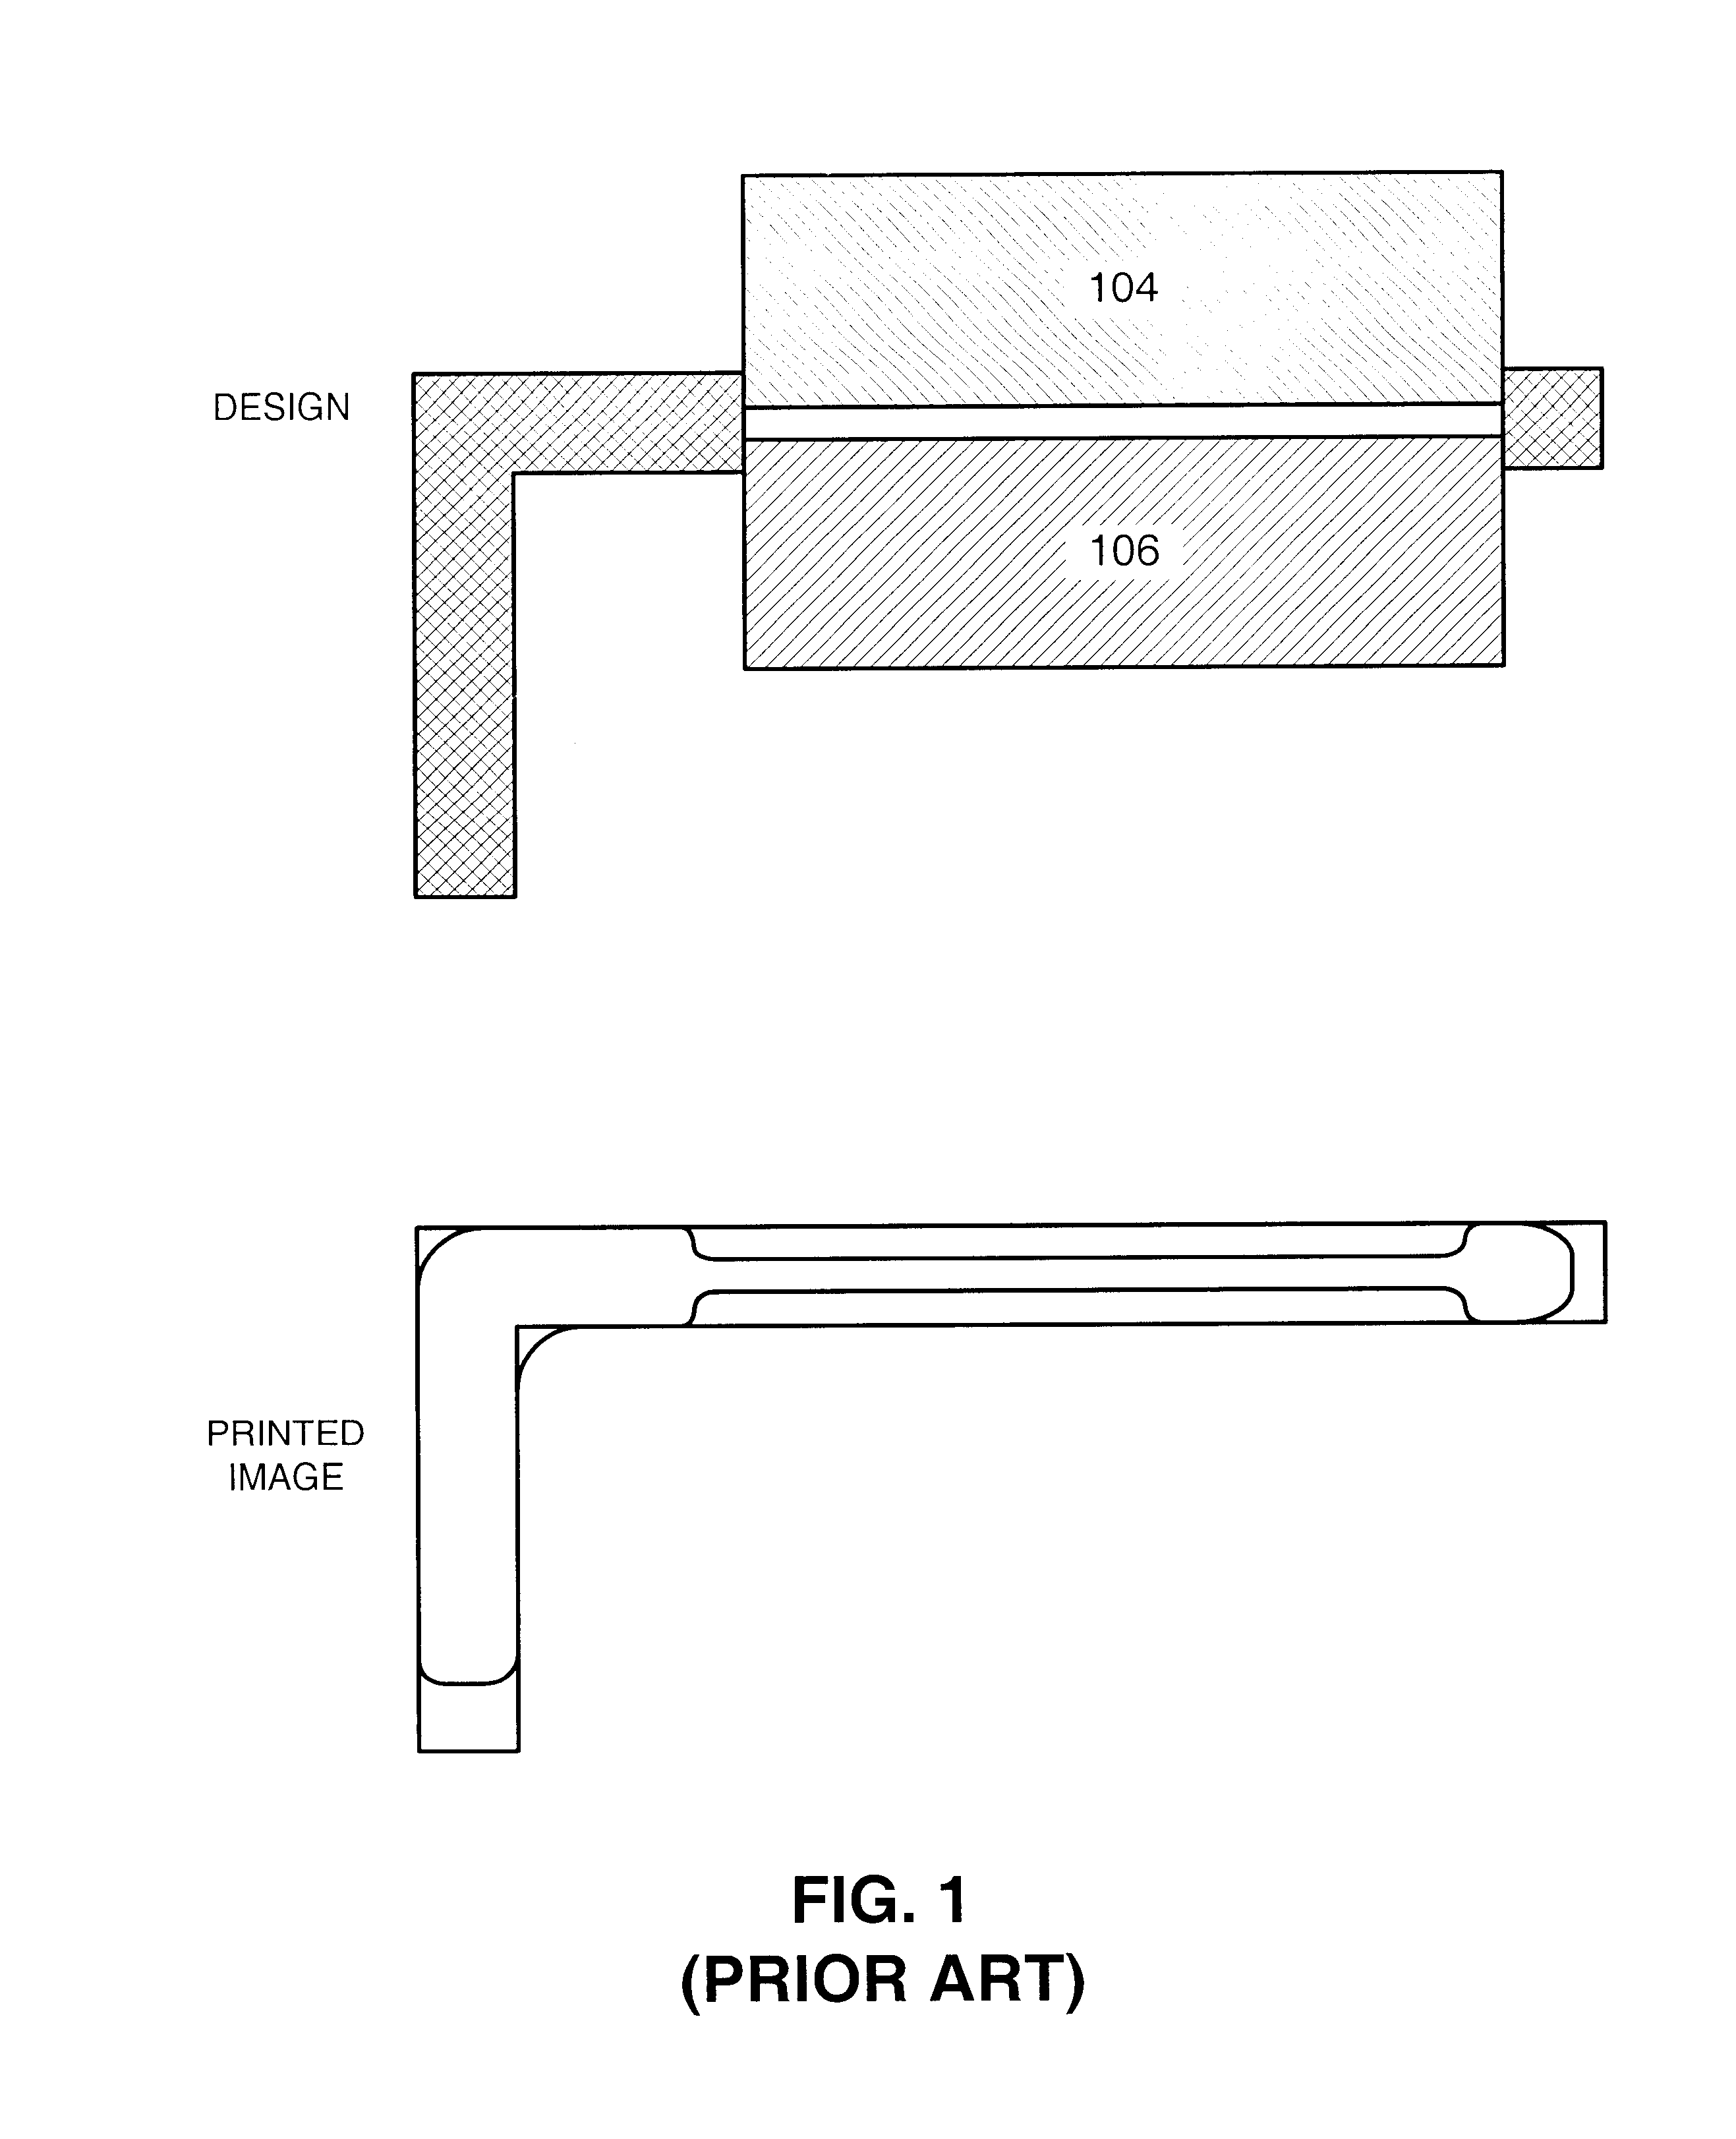 Method and apparatus for resolving coloring conflicts between phase shifters